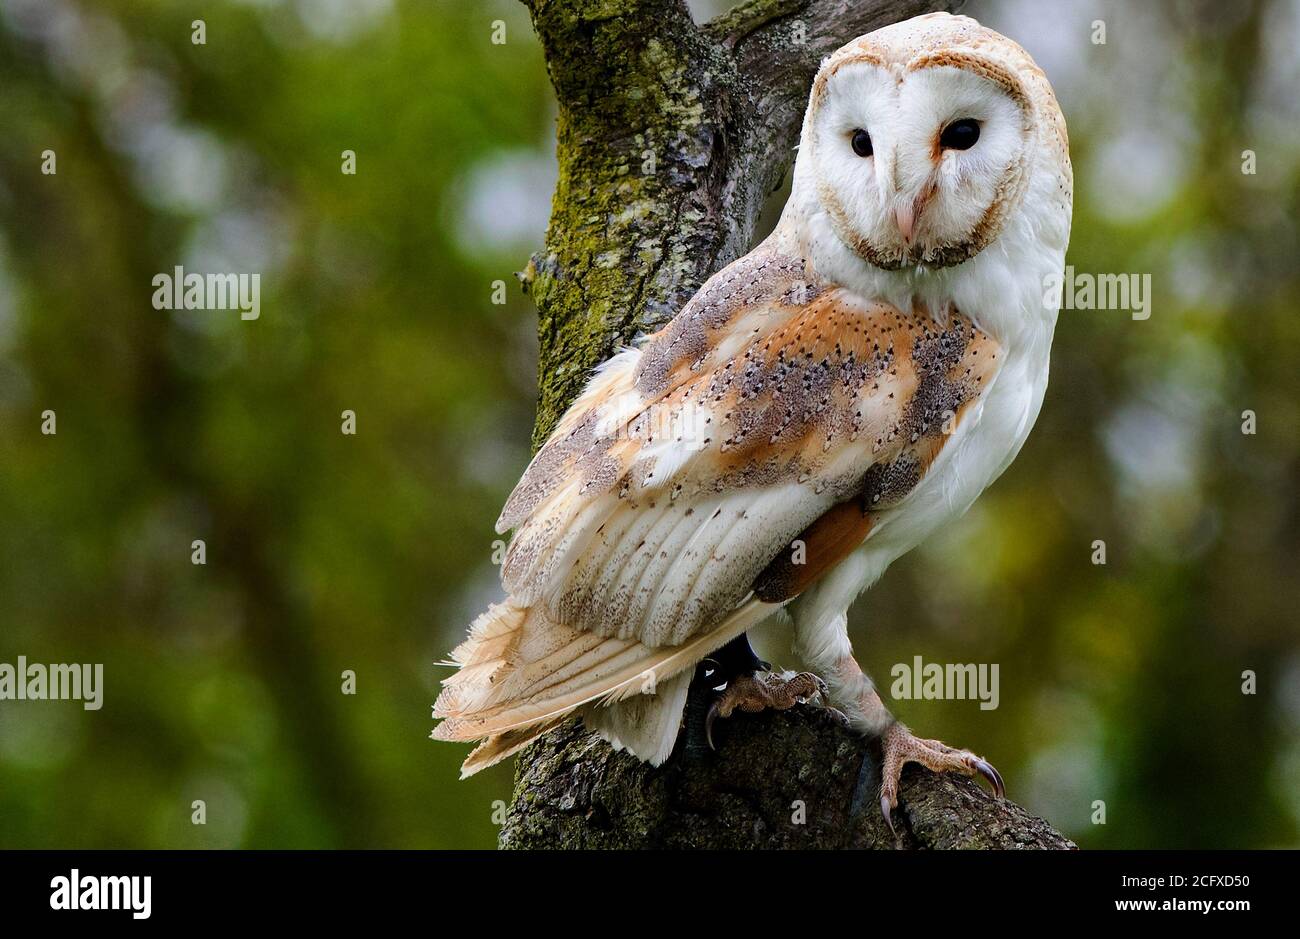 Solitary Barn Owl Perched on a large branch with a natural green bush background Stock Photo